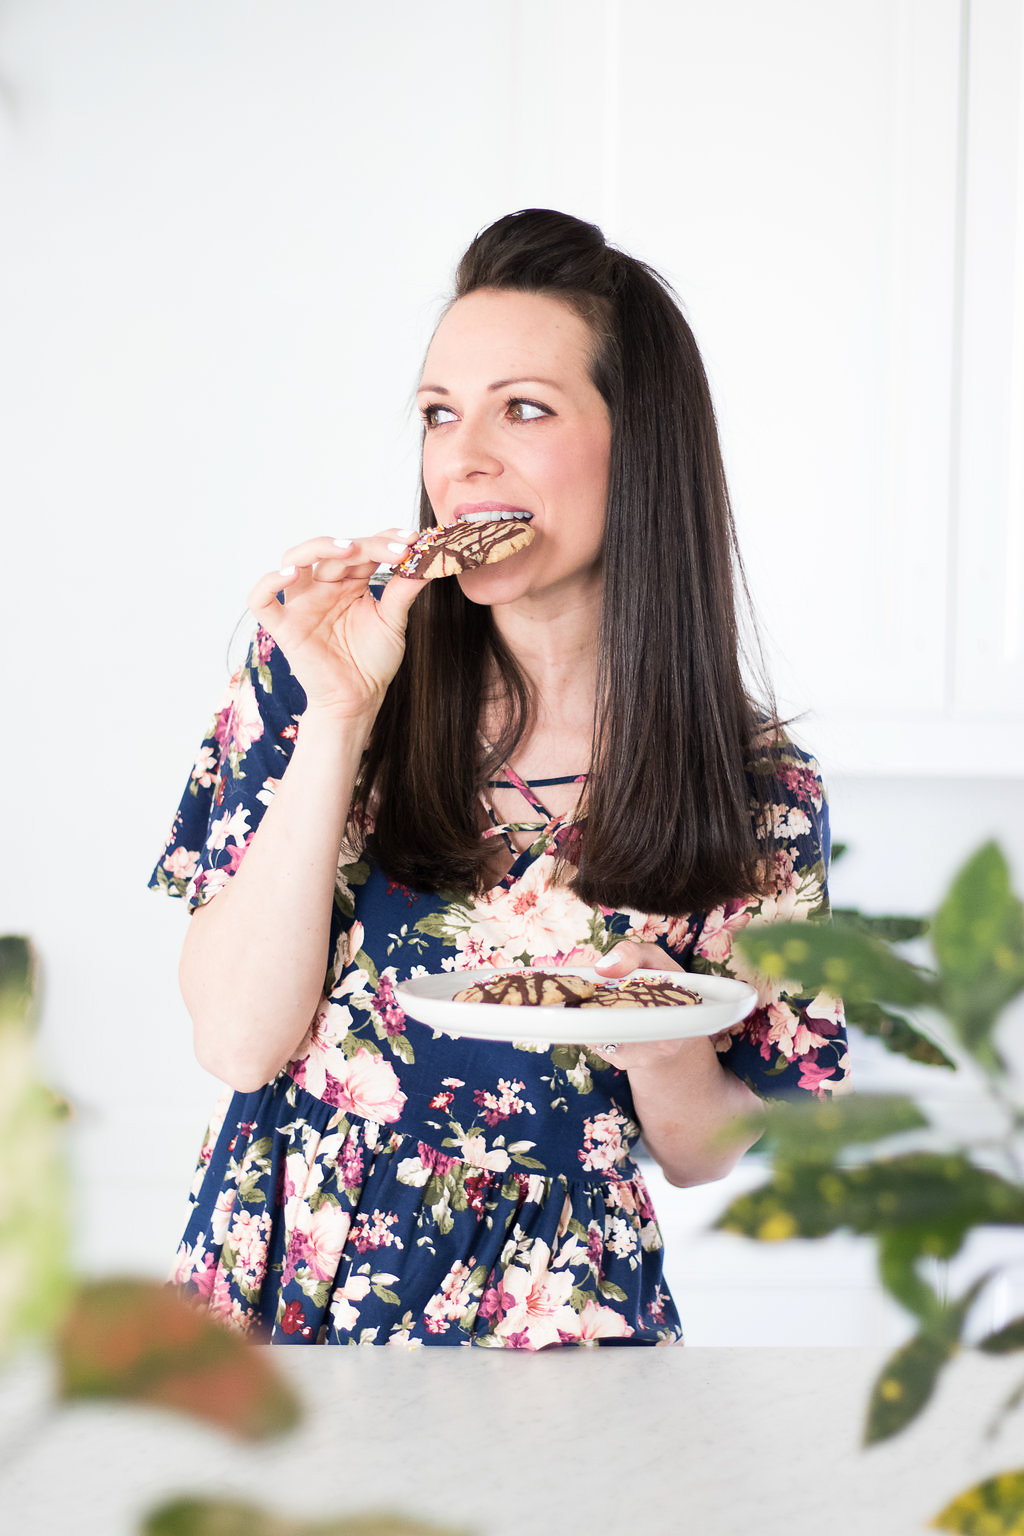 A woman eating cookies with a chocolate drizzle.